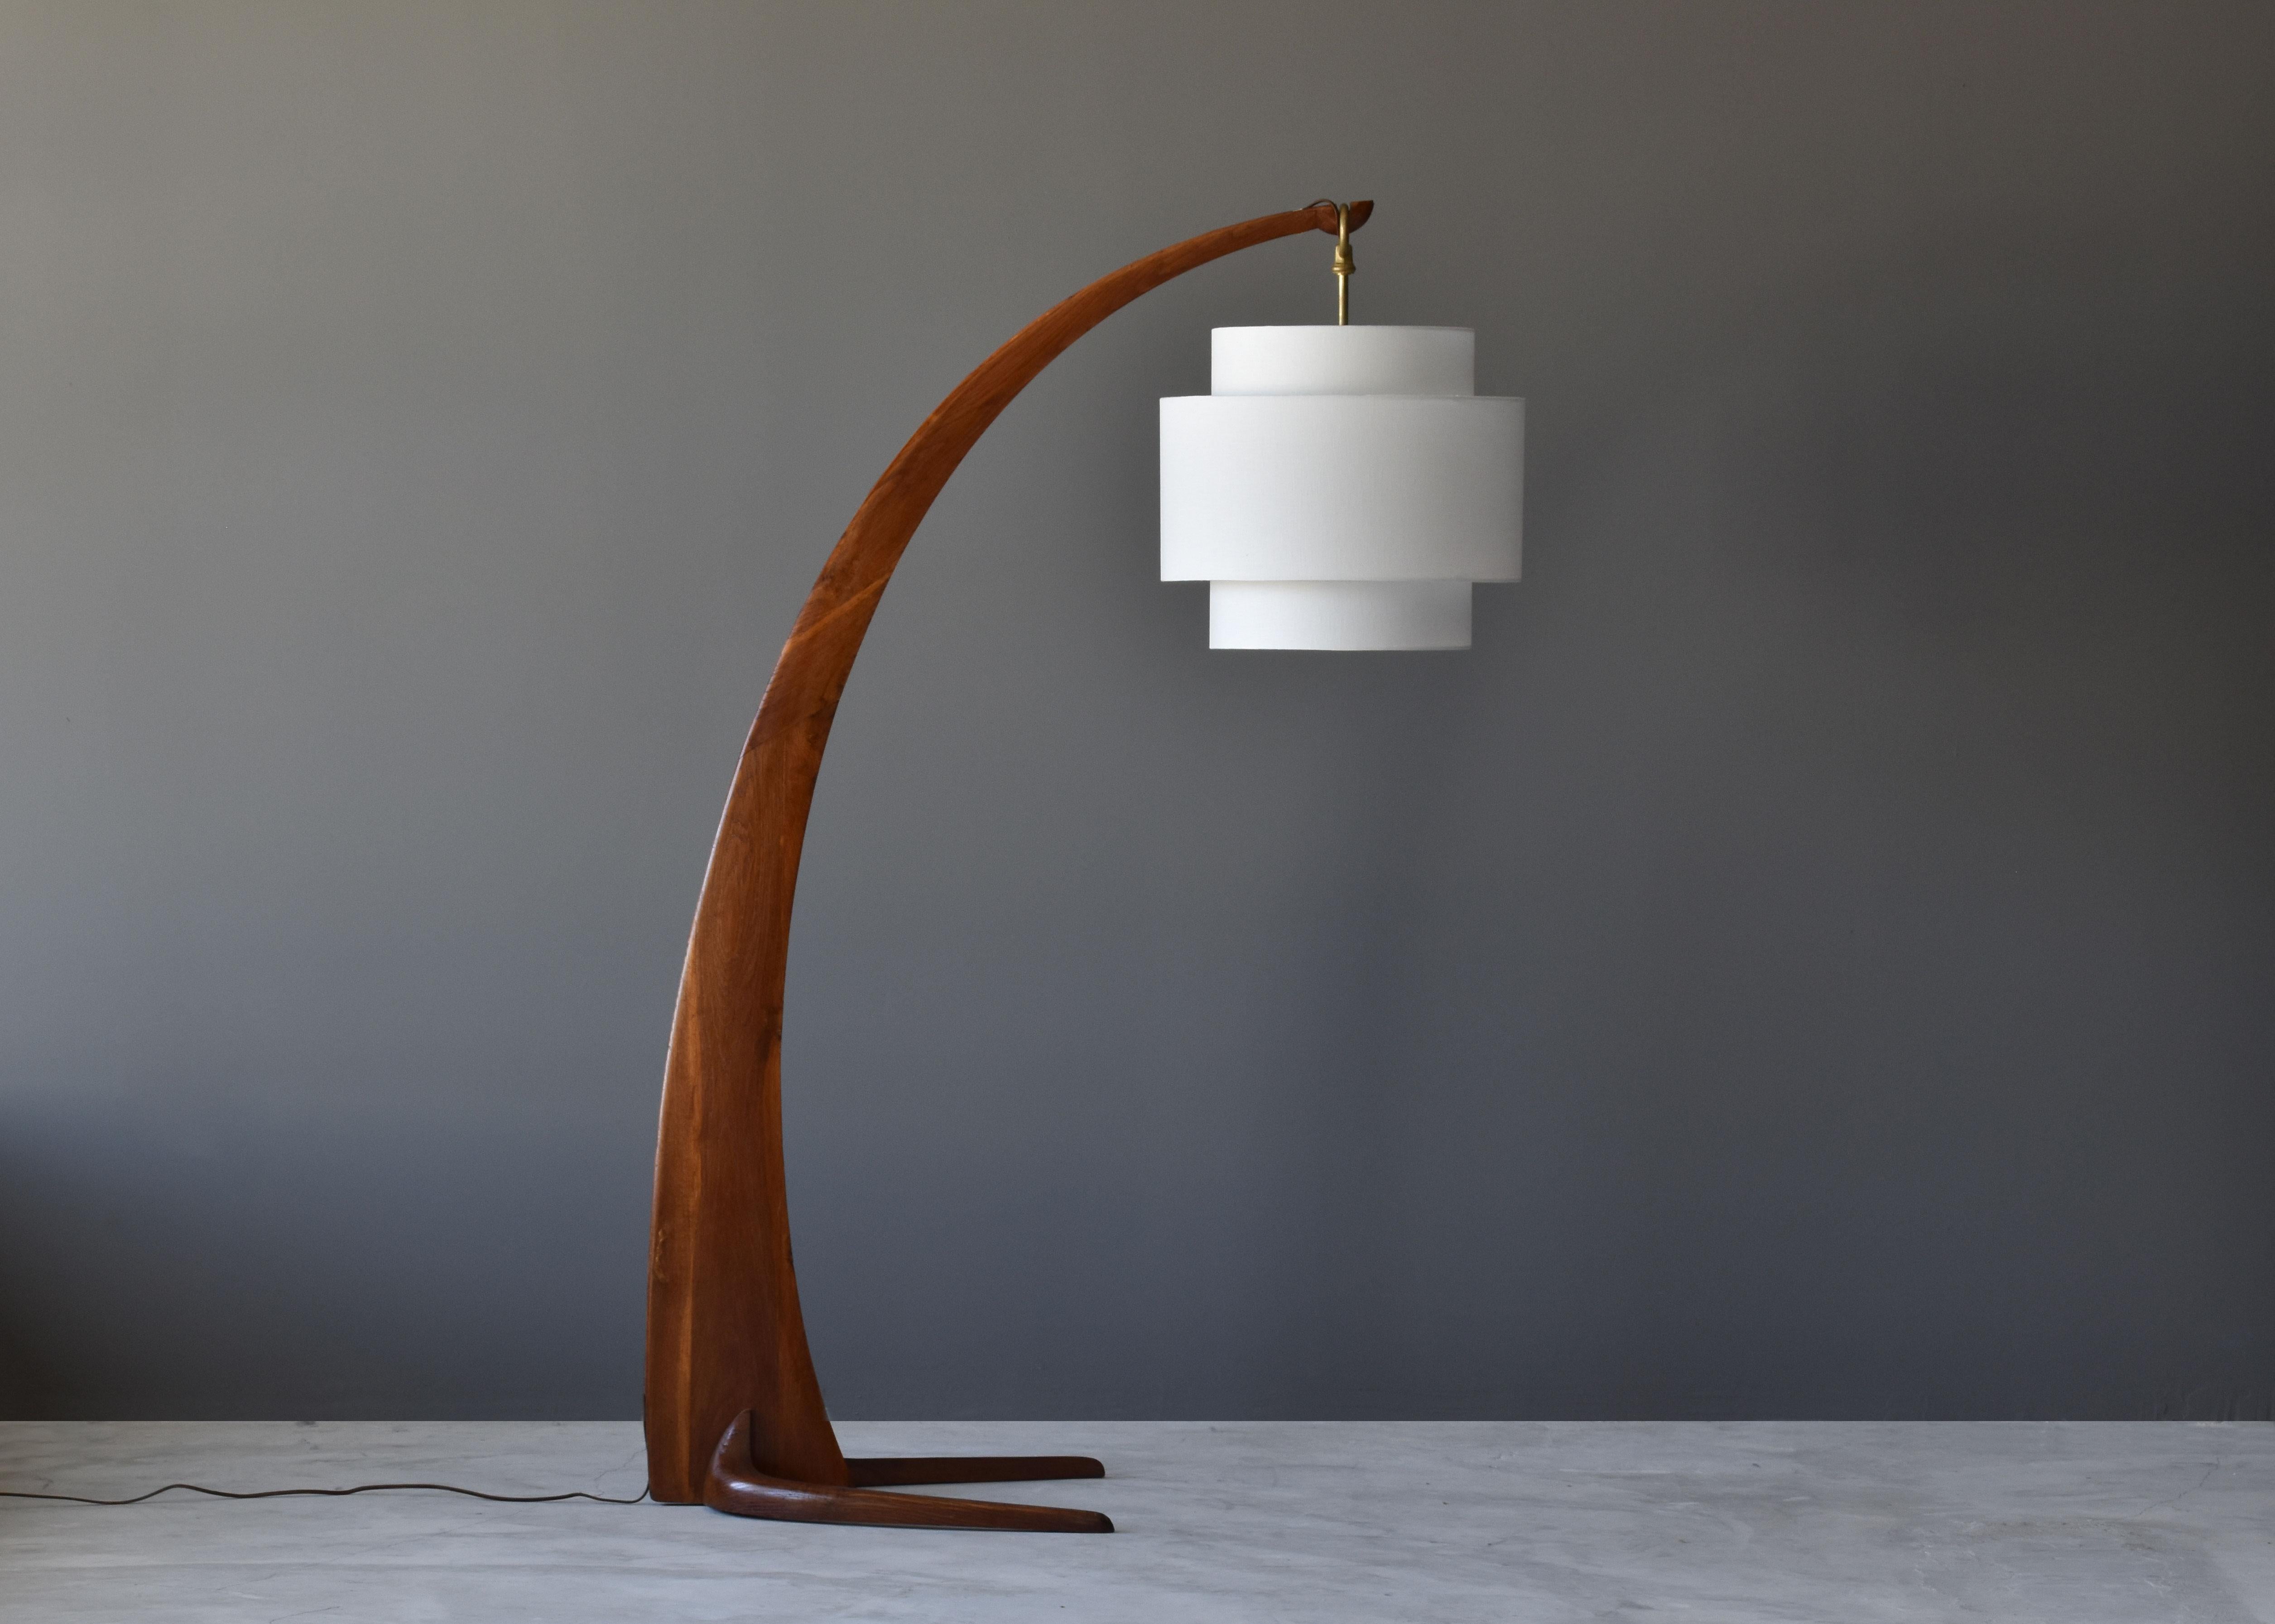 A large organic and curved floor lamp, designed by an unknown modernist designer, Italy, 1940s. 

Please note all parts, except the wooden frame and legs, are secondary materials.

Other Italian designers working in the organic style include